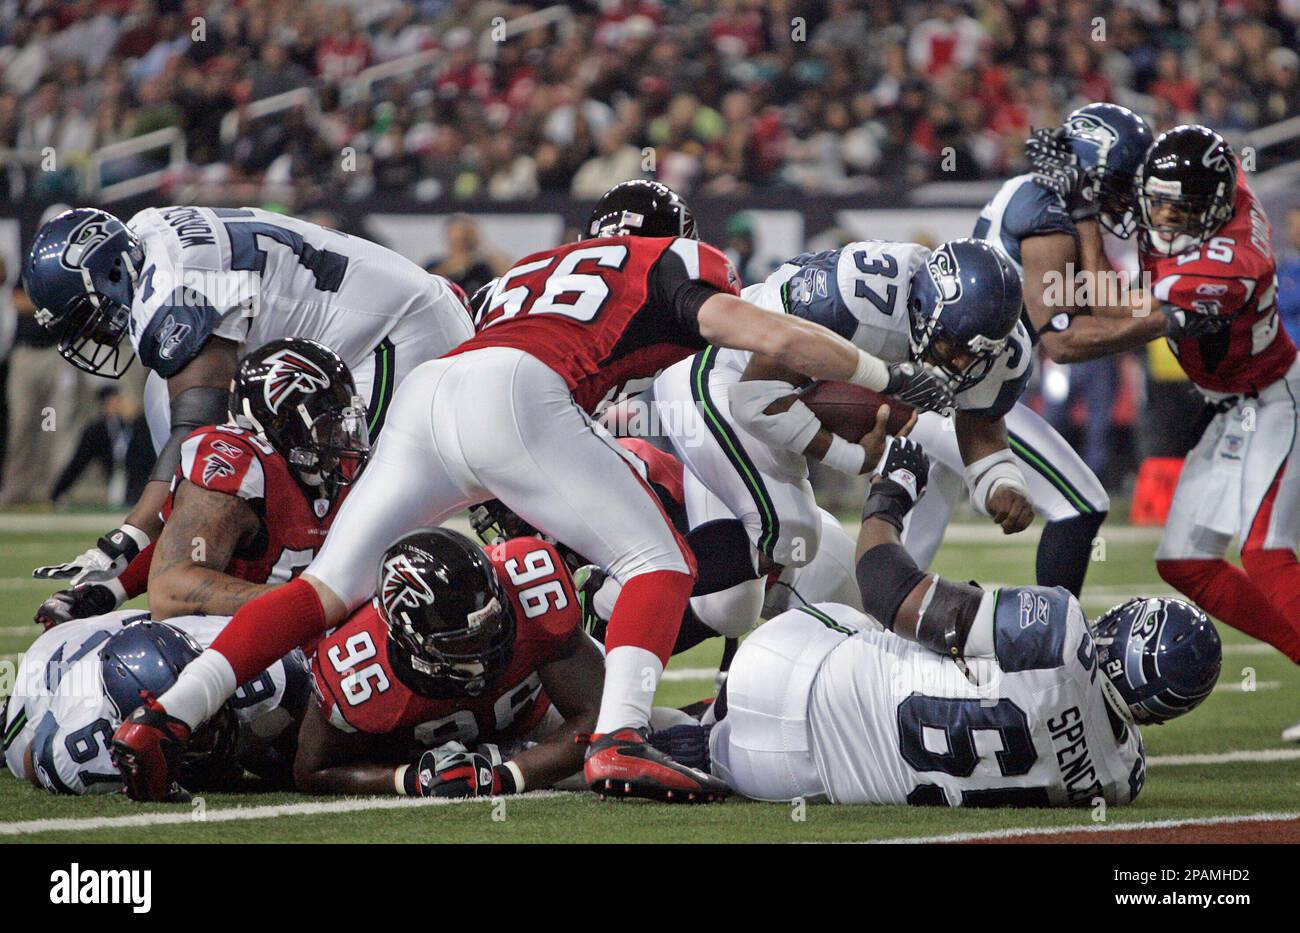 Seattle Seahawks running back Shaun Alexander (37) breaks through the line  for a touchdown as Atlanta Falcons linebacker Keith Brooking (56) closes in  during the first quarter of a football game Sunday ,